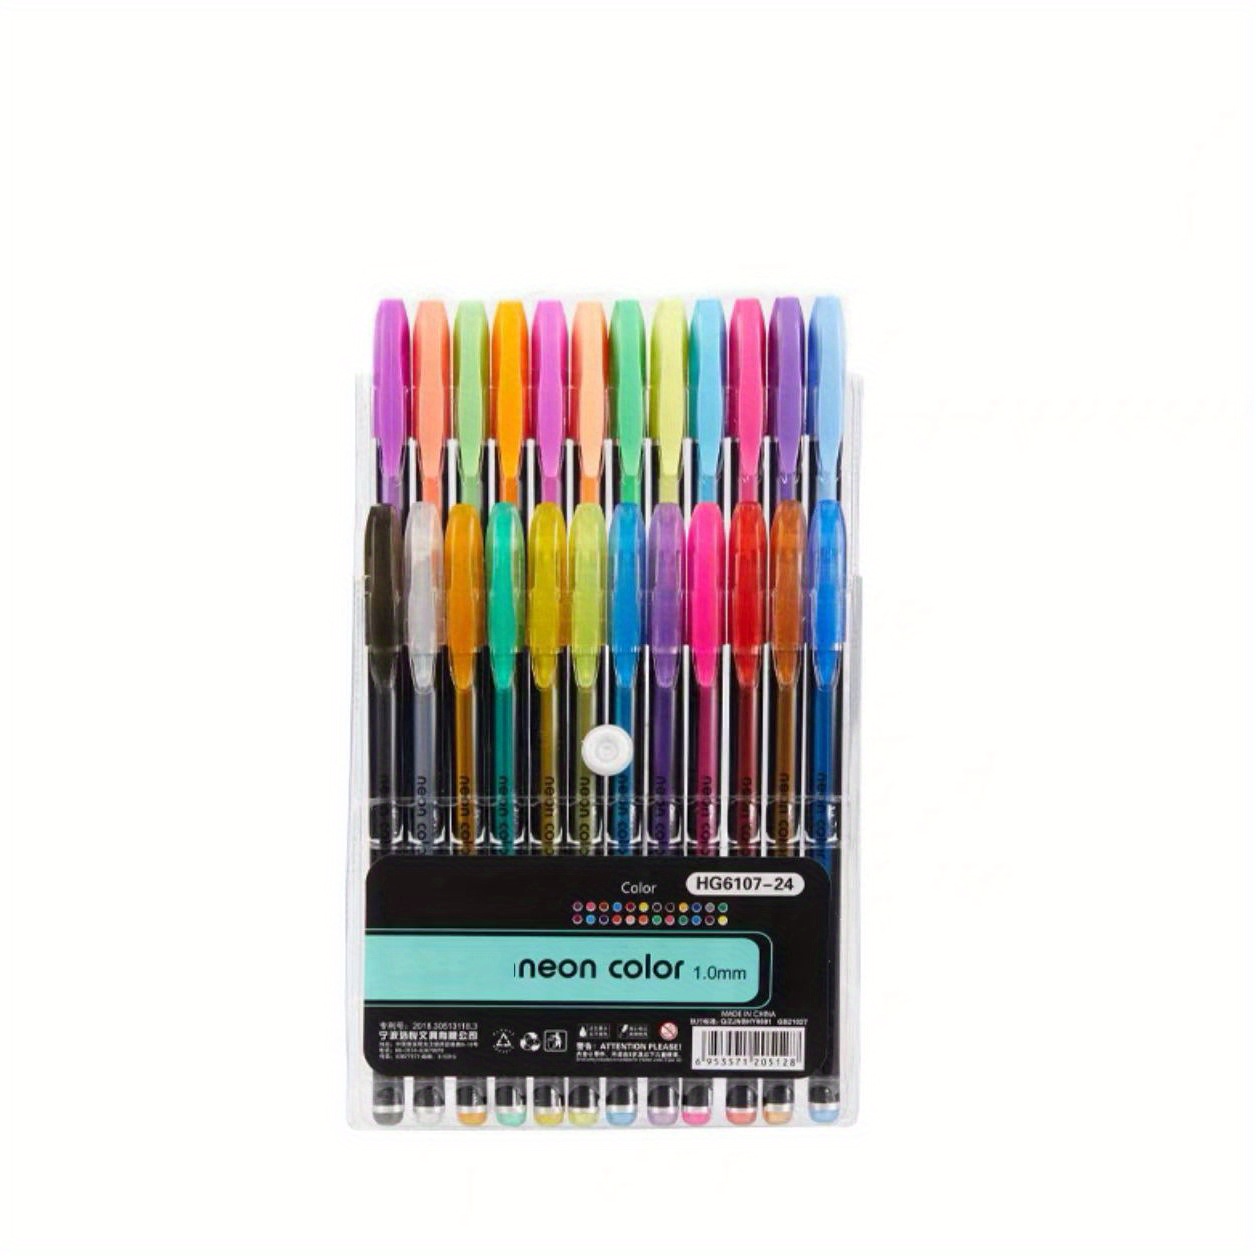  Sameno School Supplies ✓ 24/48 Pcs Colors Gel Pen Refills Sets,  Students Office Watercolor Gel Pen Markers Replace Supplies Pen Refills  (Multicolor) add on items one dollar item (48 pcs) : Office Products